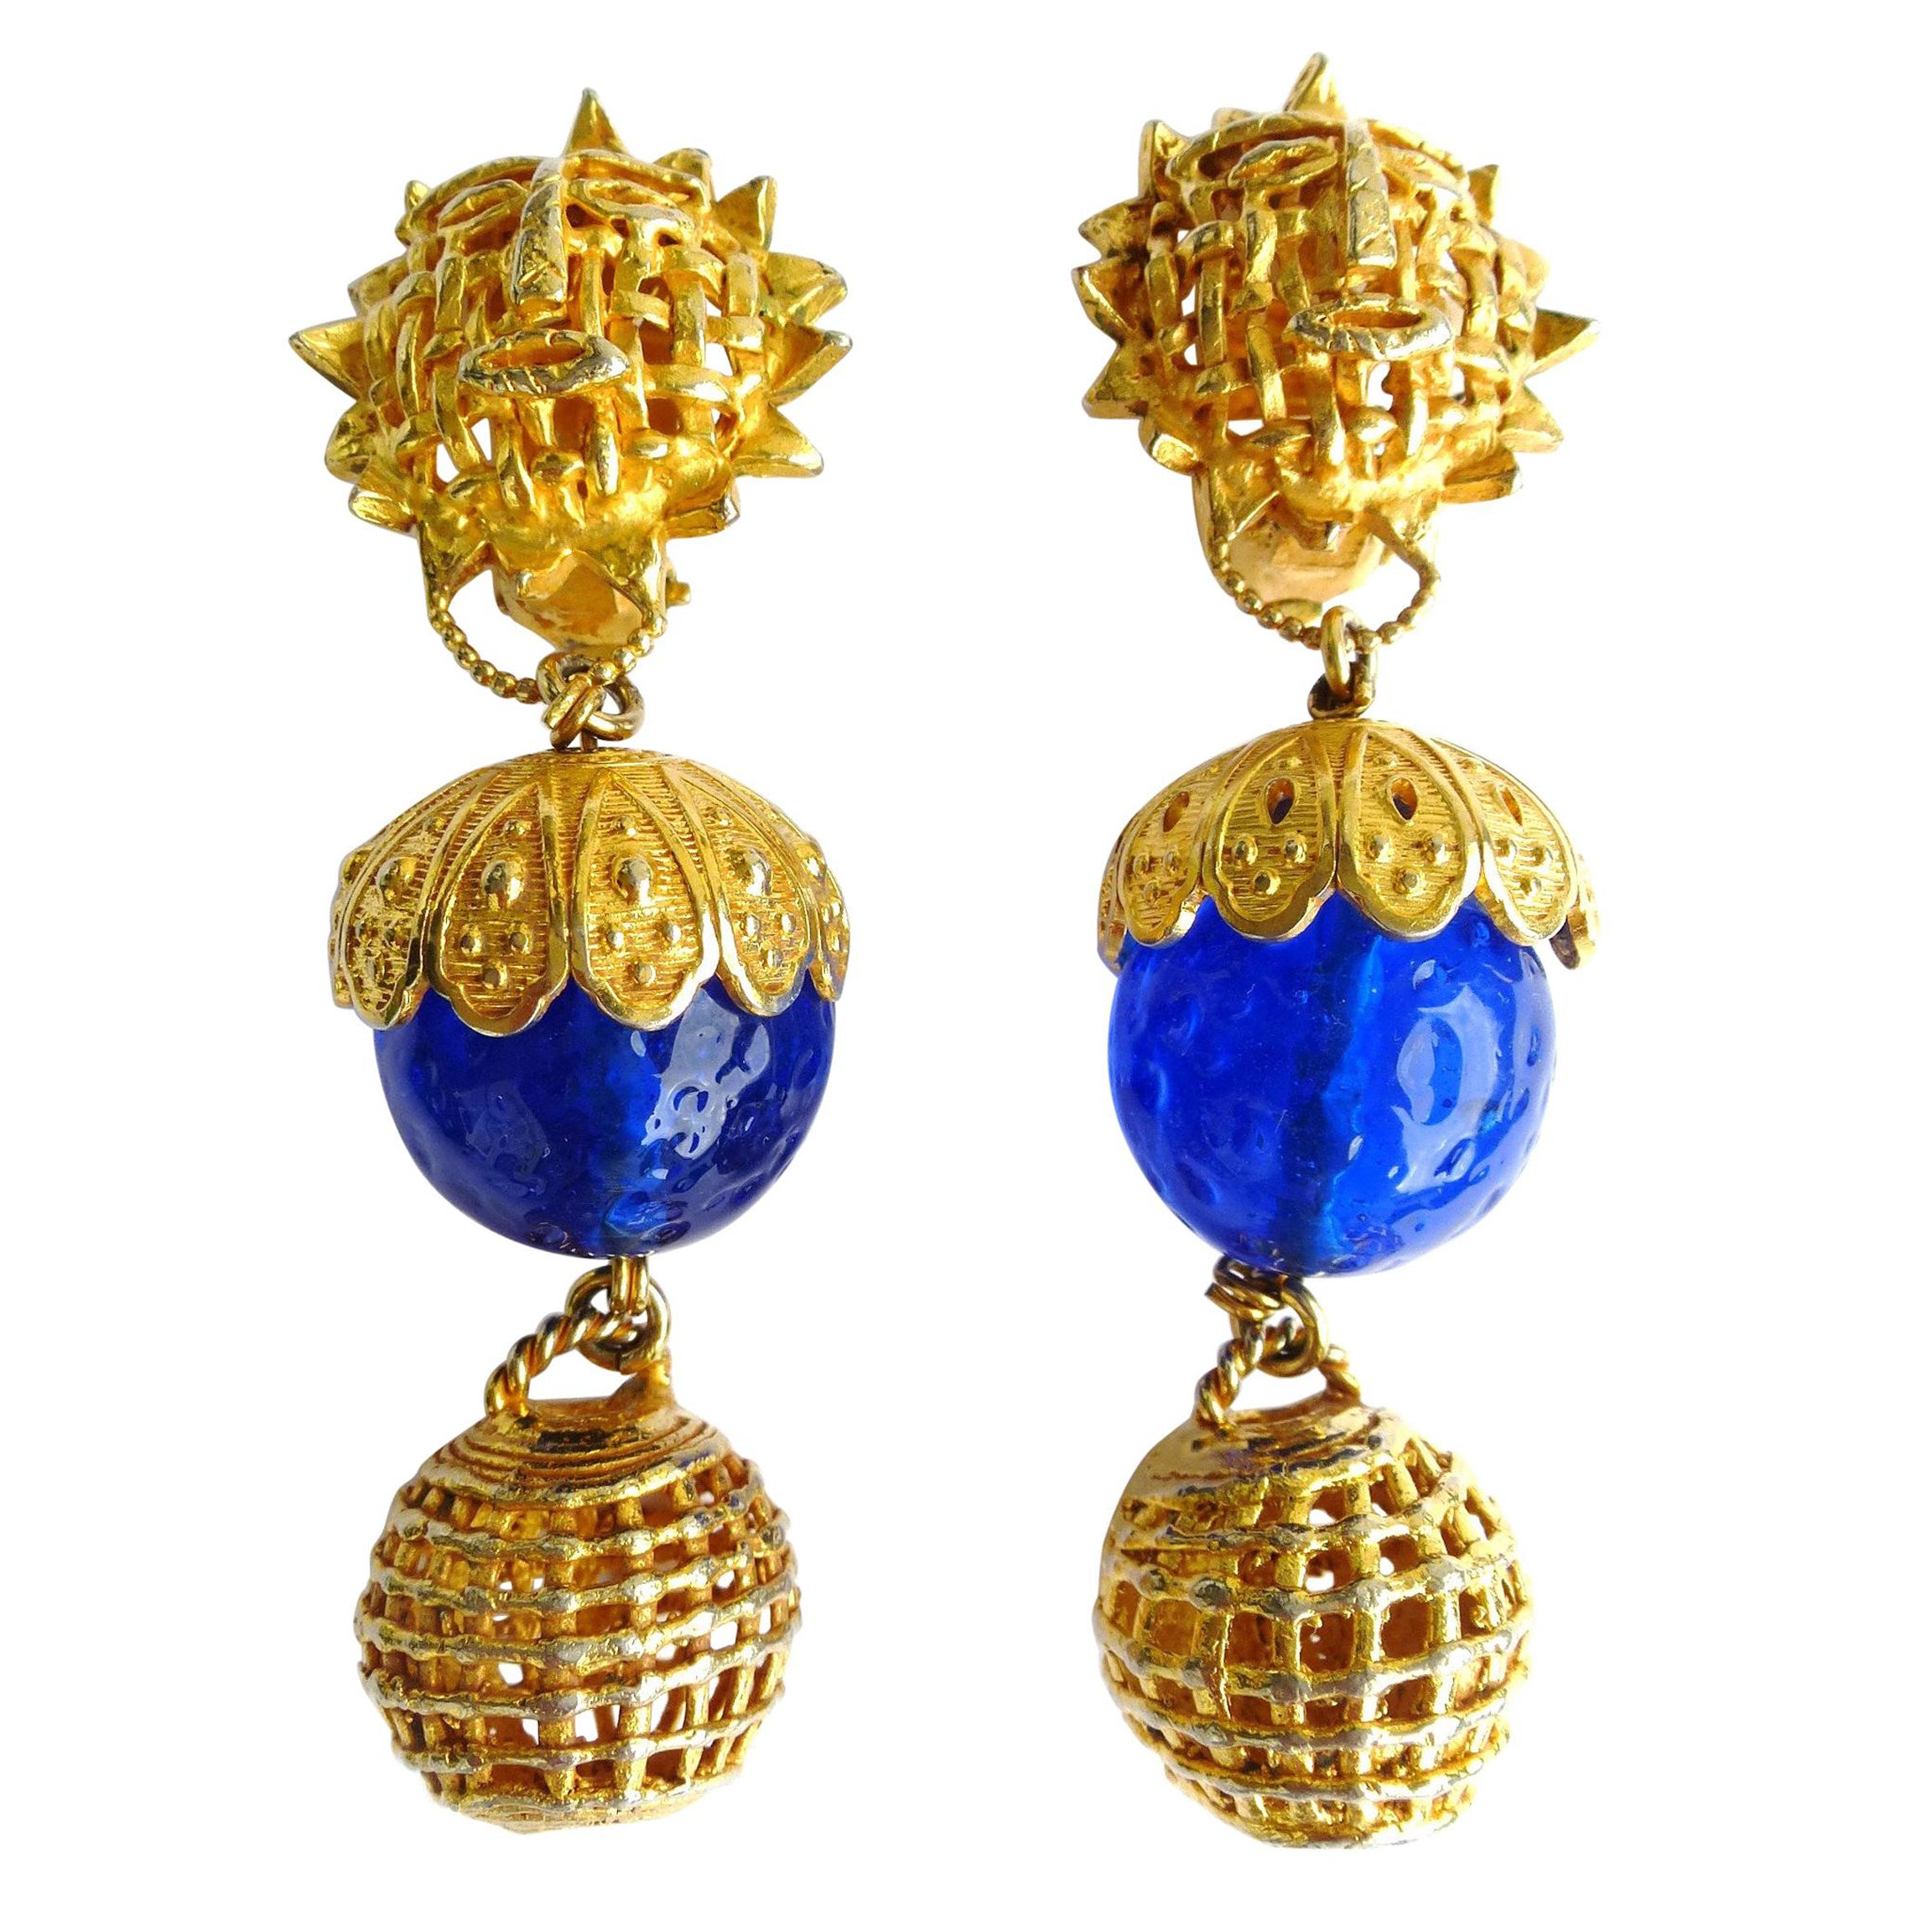 Chanel White Imitation Pearl and Gold Metal CC Earrings, 1970-1981, Clip-On | Fashion Earrings, Vintage Jewelry